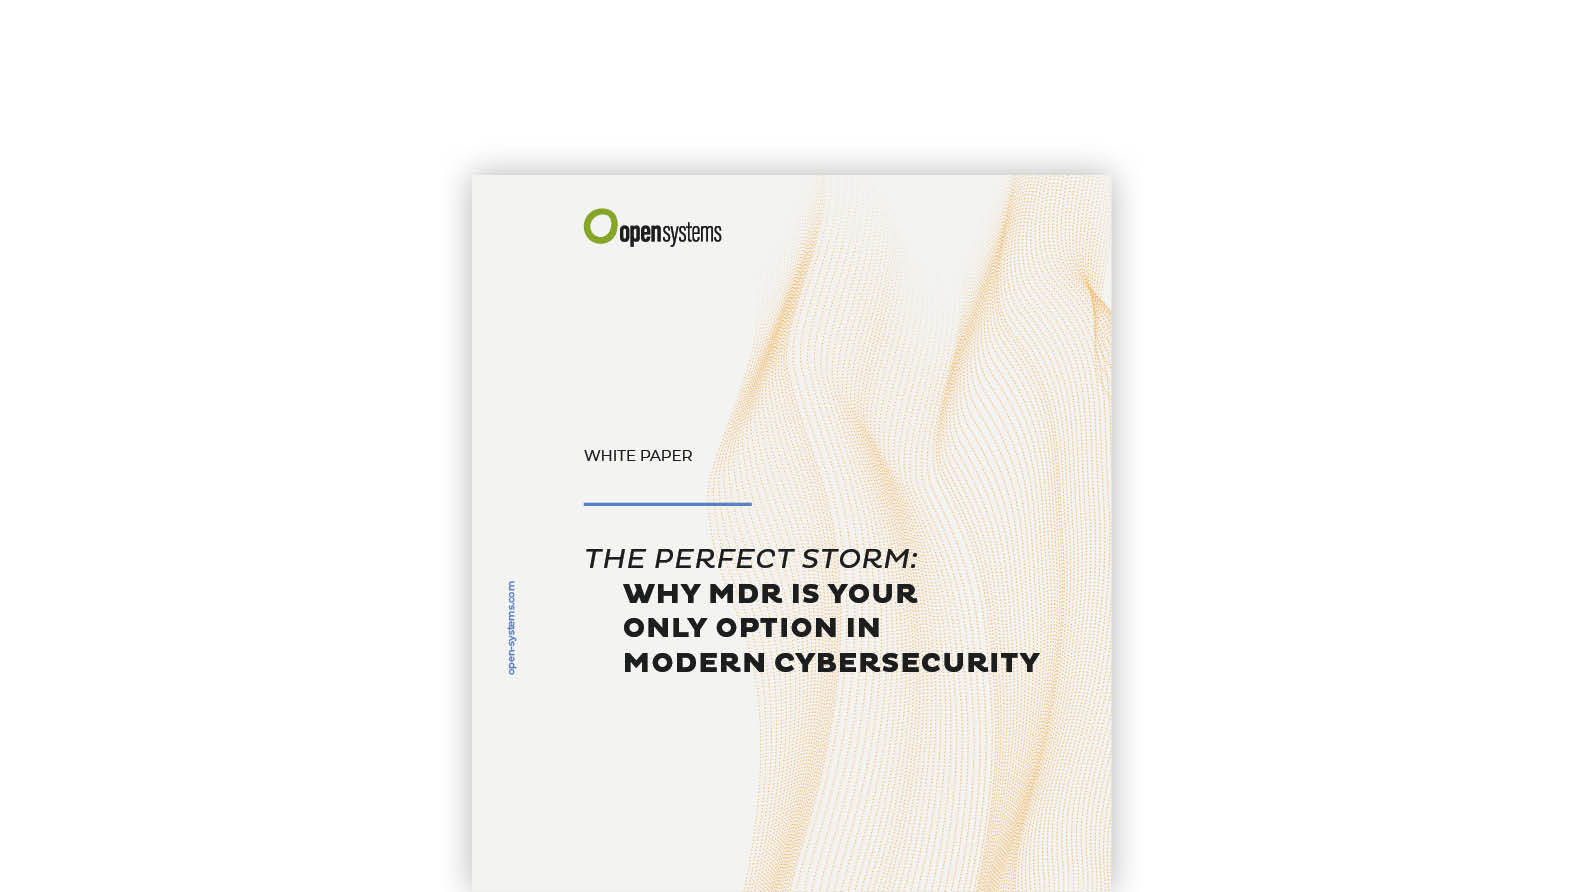 The Perfect Storm – Why MDR Is Your Only Option in Modern Cybersecurity